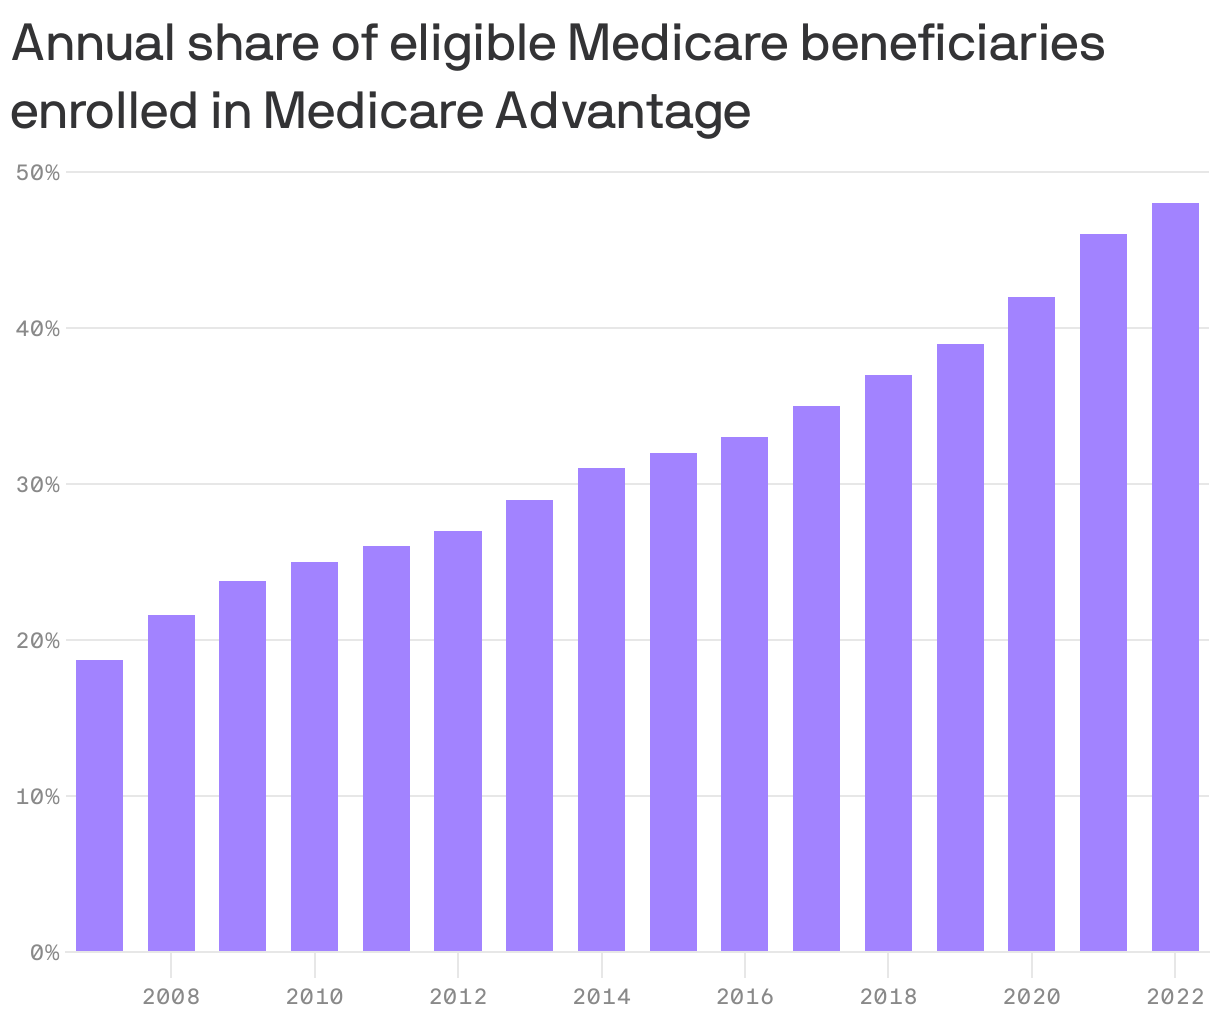 Annual share of eligible Medicare beneficiaries enrolled in Medicare Advantage